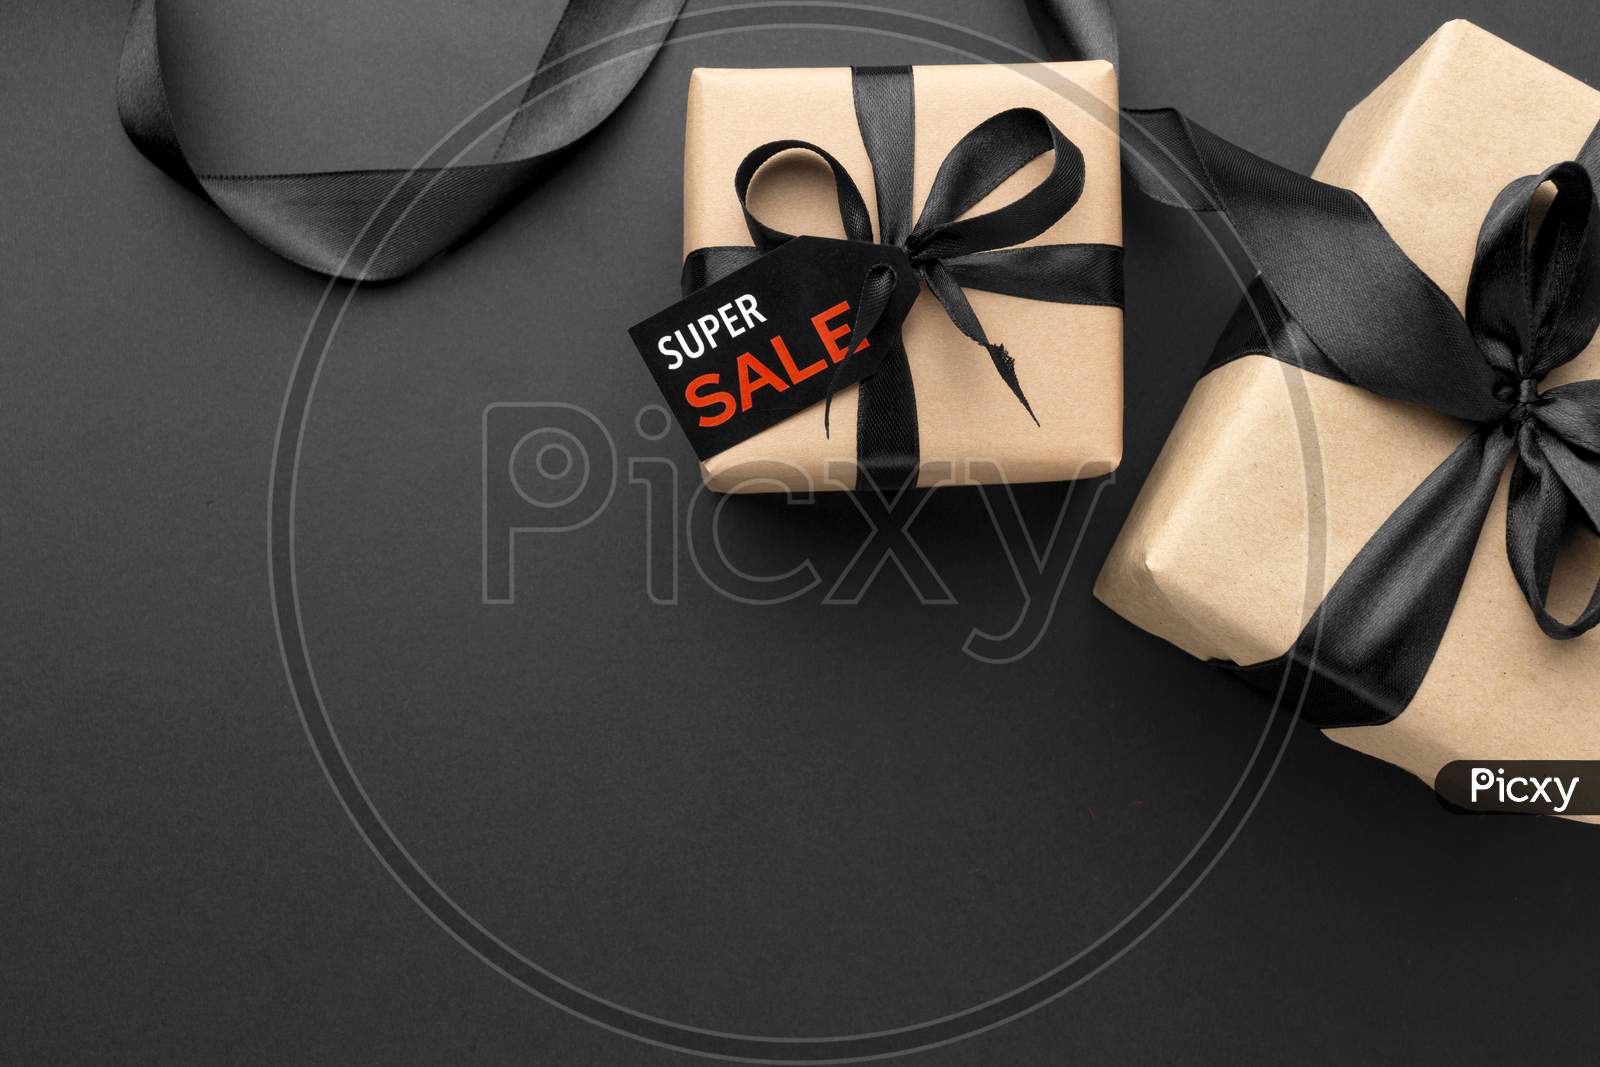 Black friday sales arrangement on black background with copy space